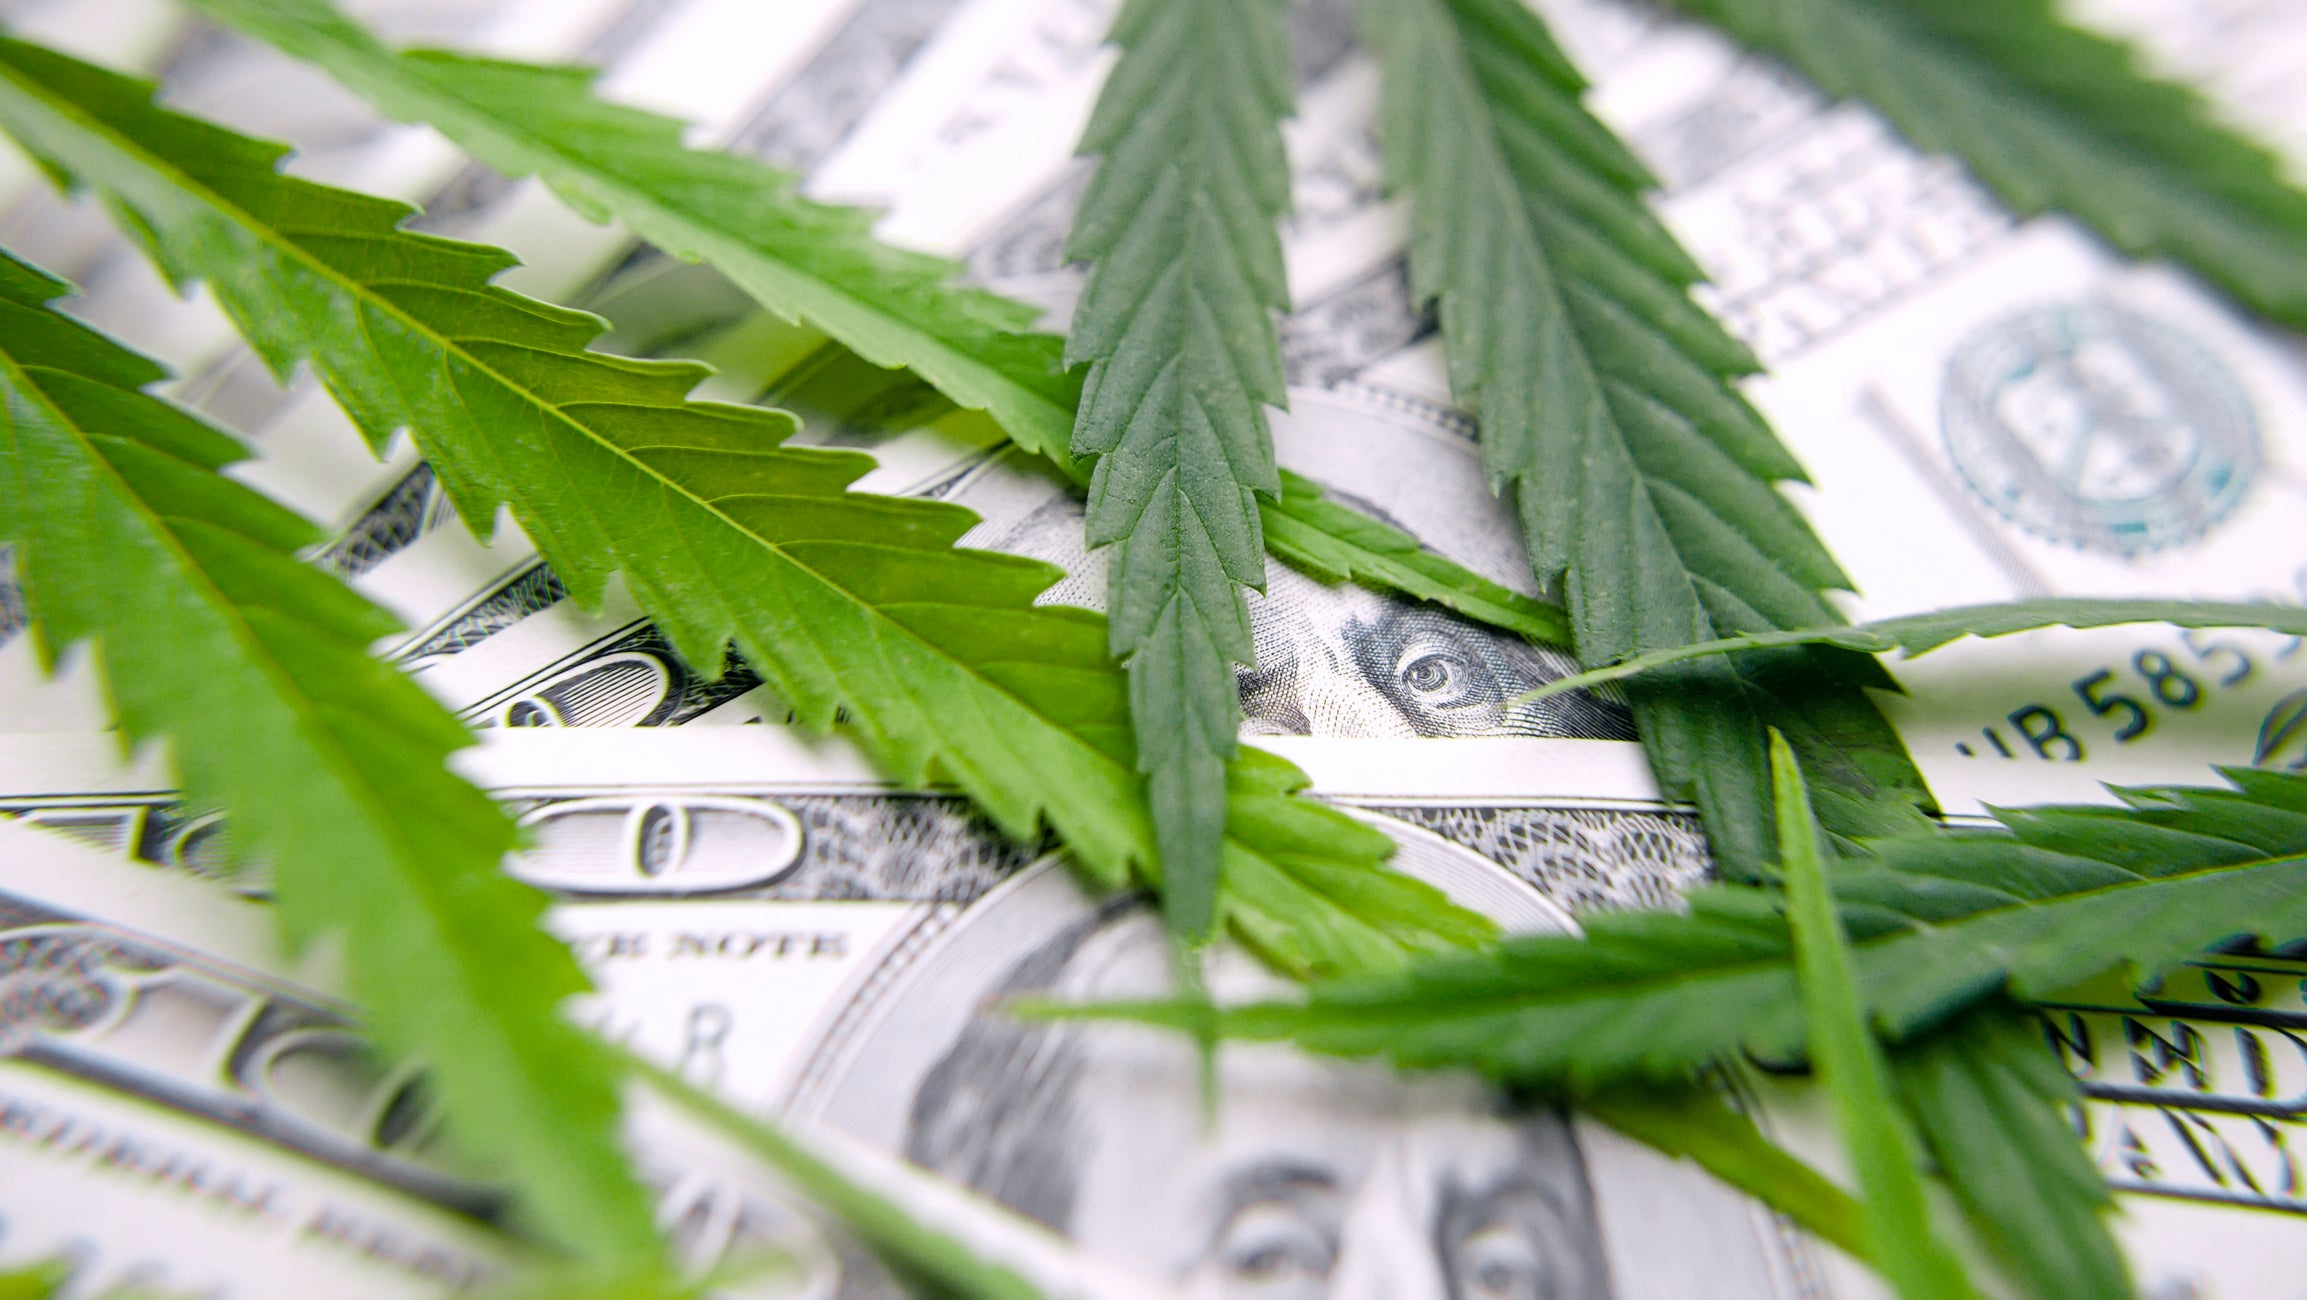 3 Under-the-Radar Cannabis Stocks to Buy Right Now